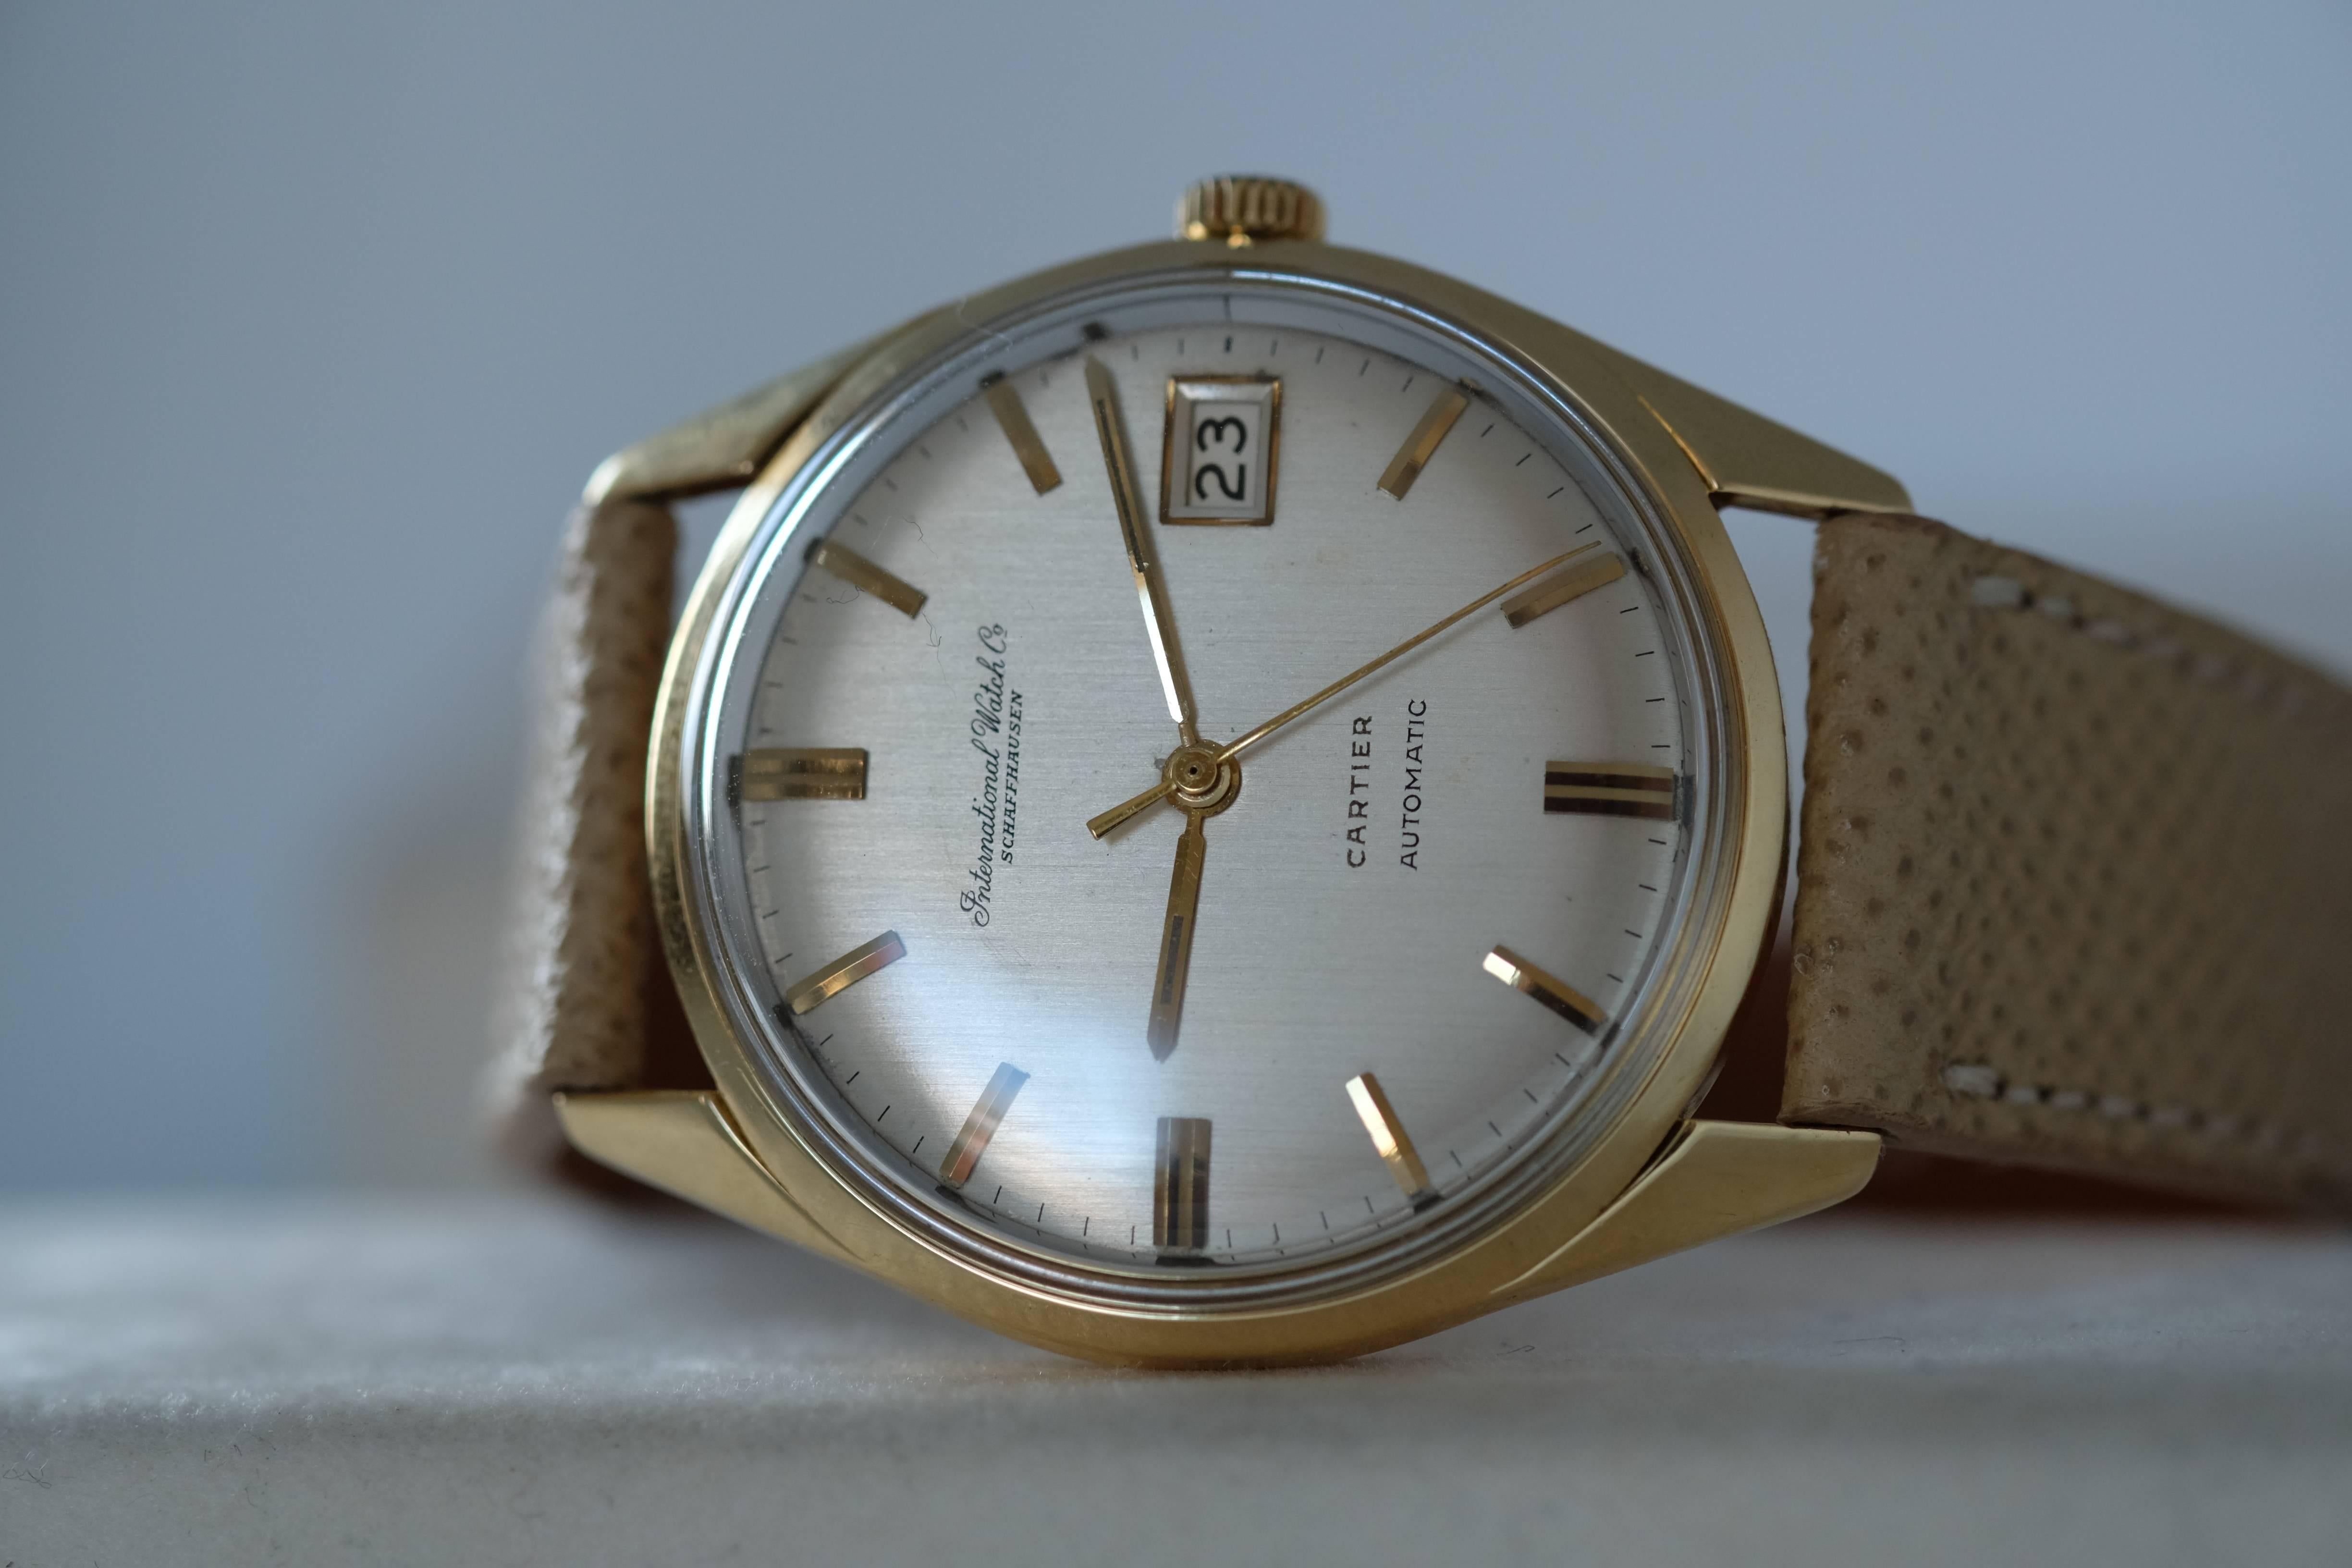 International Watch Company, 18kt yellow Gold automatic for Cartier London

Circa: 1960's

Movement: Calibre 8541 from International Watch company,   movement  has center second with date, and fitted  with Pellaton winding mechanism

Case: 